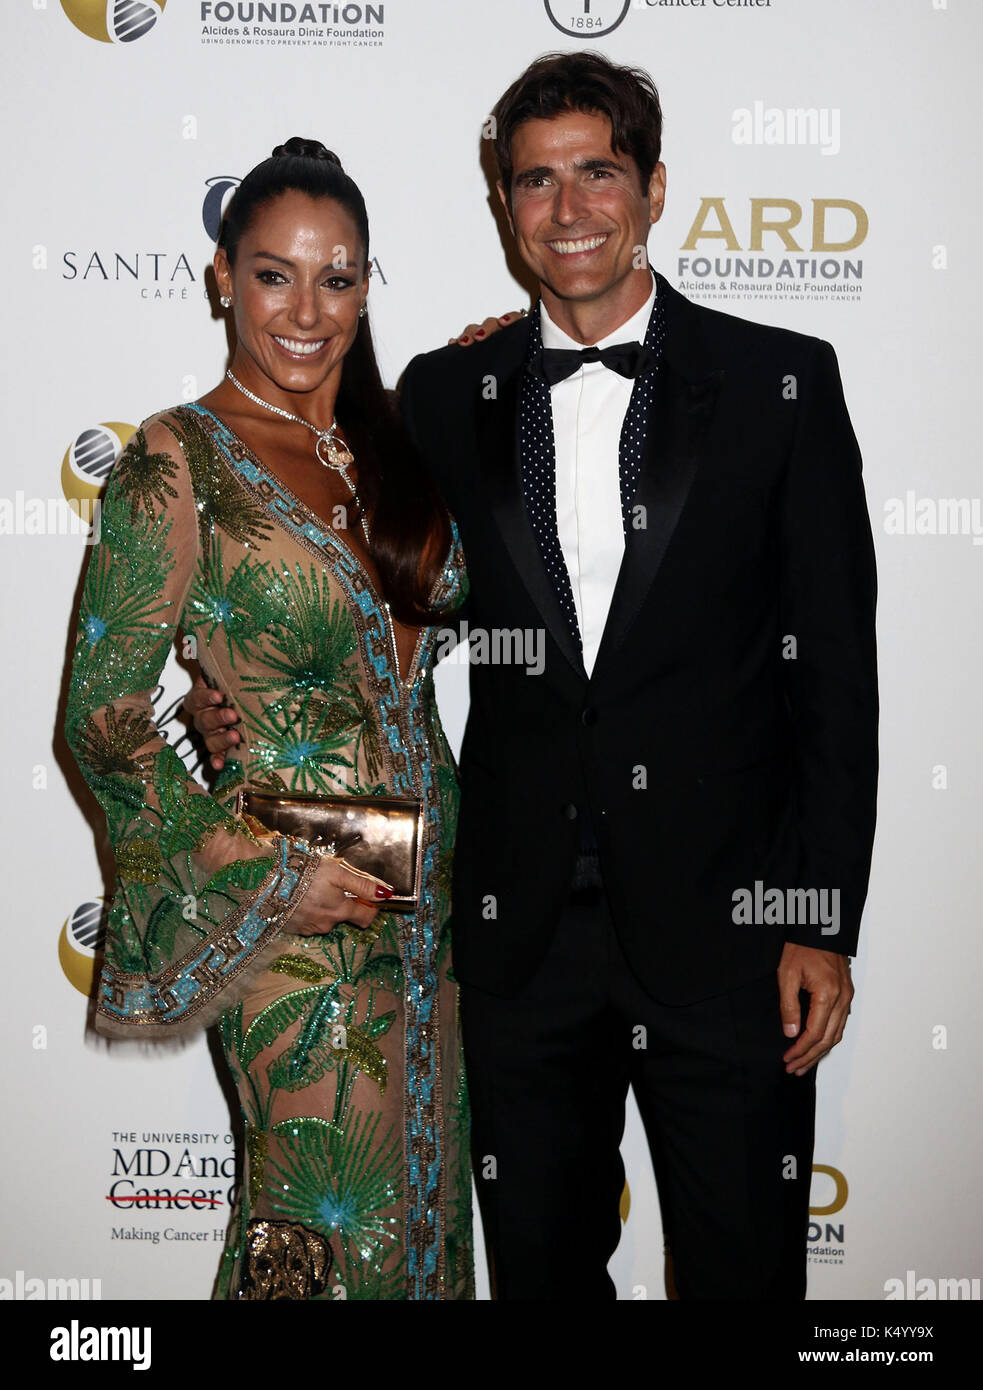 New York, New York, USA. 7th Sep, 2017. ARD founder ANA PAOLA DINIZ and actor REYNALDO GIANECCHINI attend The Alcides & Rosaura Diniz (ARD) Foundation's first fundraising gala, benefiting Memorial Sloan Kettering Cancer Center held at Cipriani 42nd Street. Credit: Nancy Kaszerman/ZUMA Wire/Alamy Live News Stock Photo